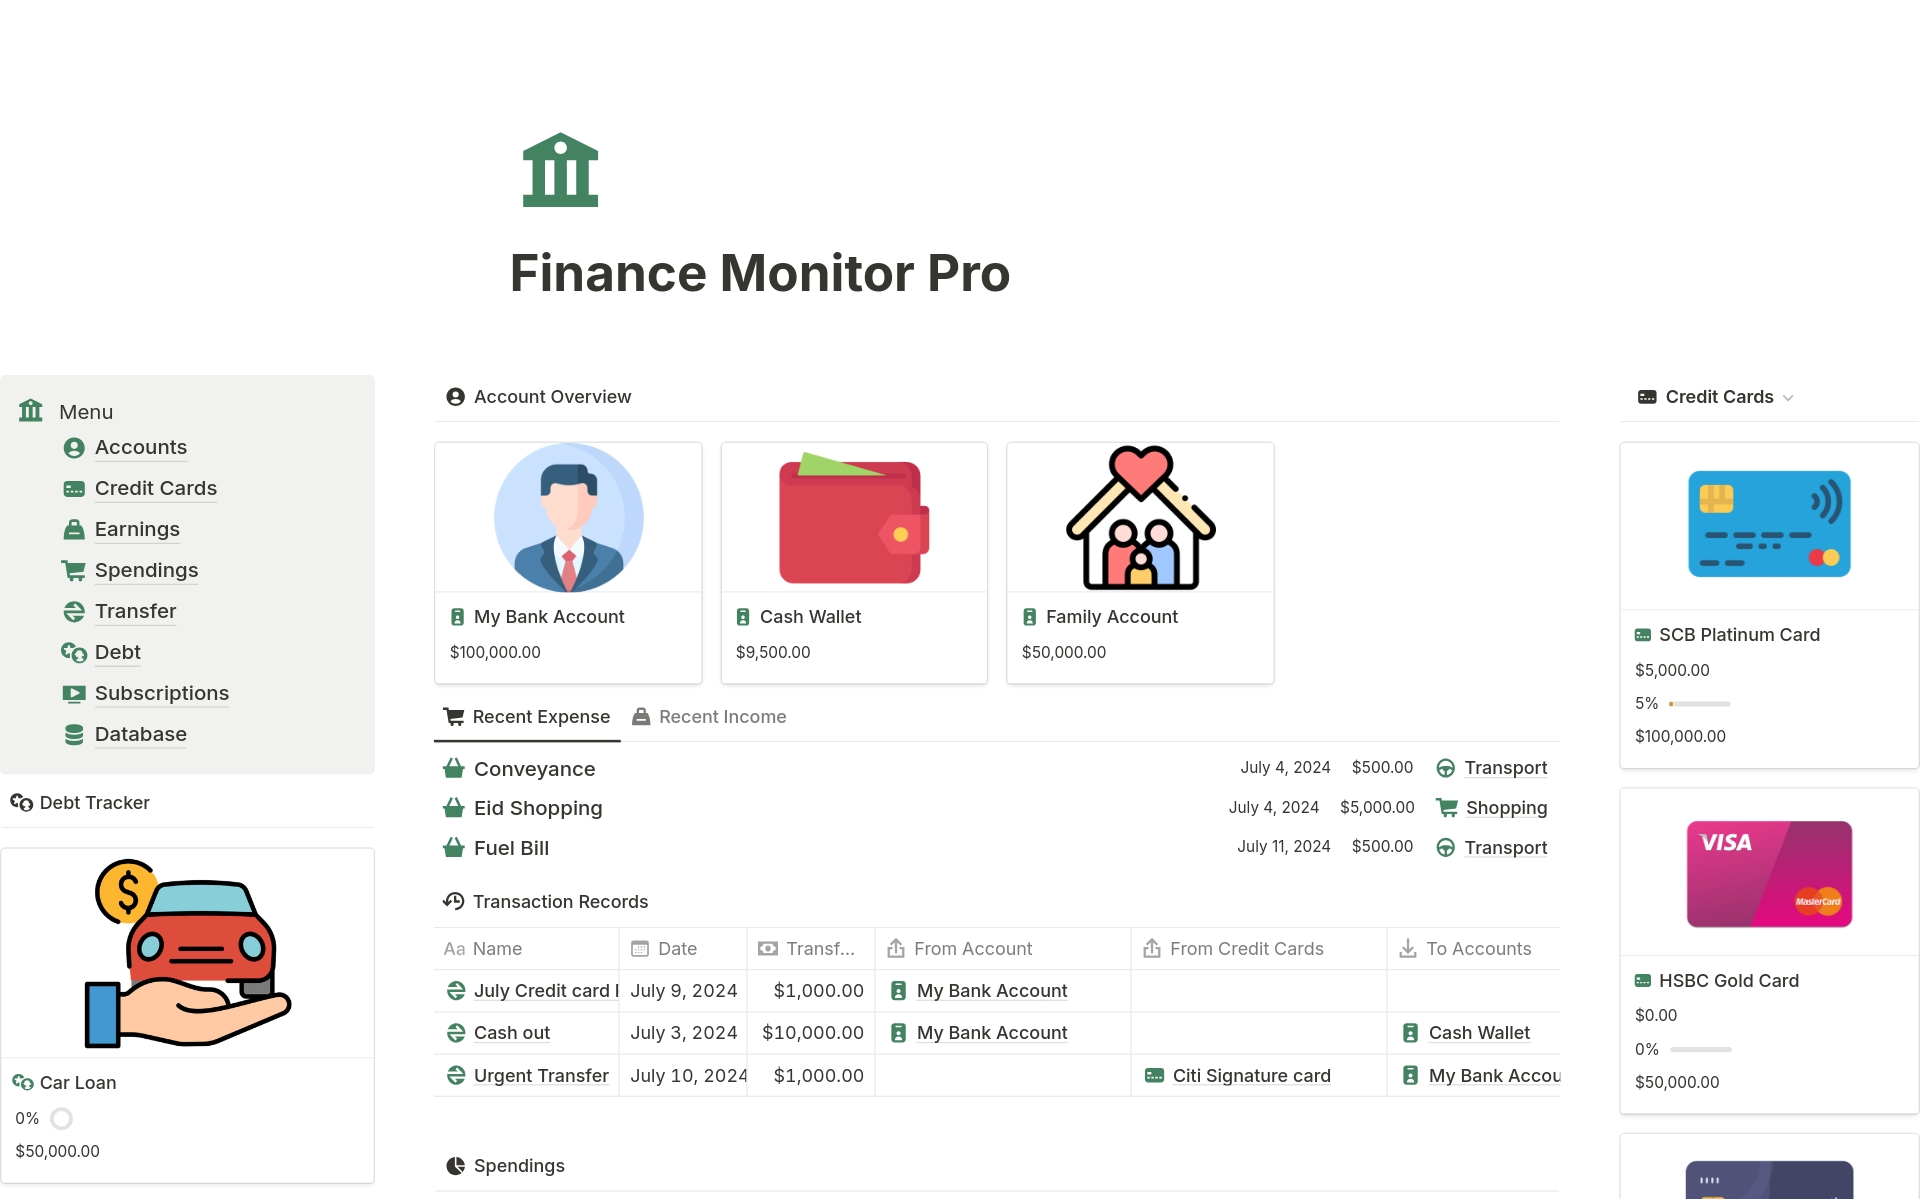 🚀Get a dynamic dashboard displaying account balances, debt status, credit card activities, and spending insights. Features include detailed sections for accounts, credit cards, earnings, spending, transfers, debts, and subscriptions. 